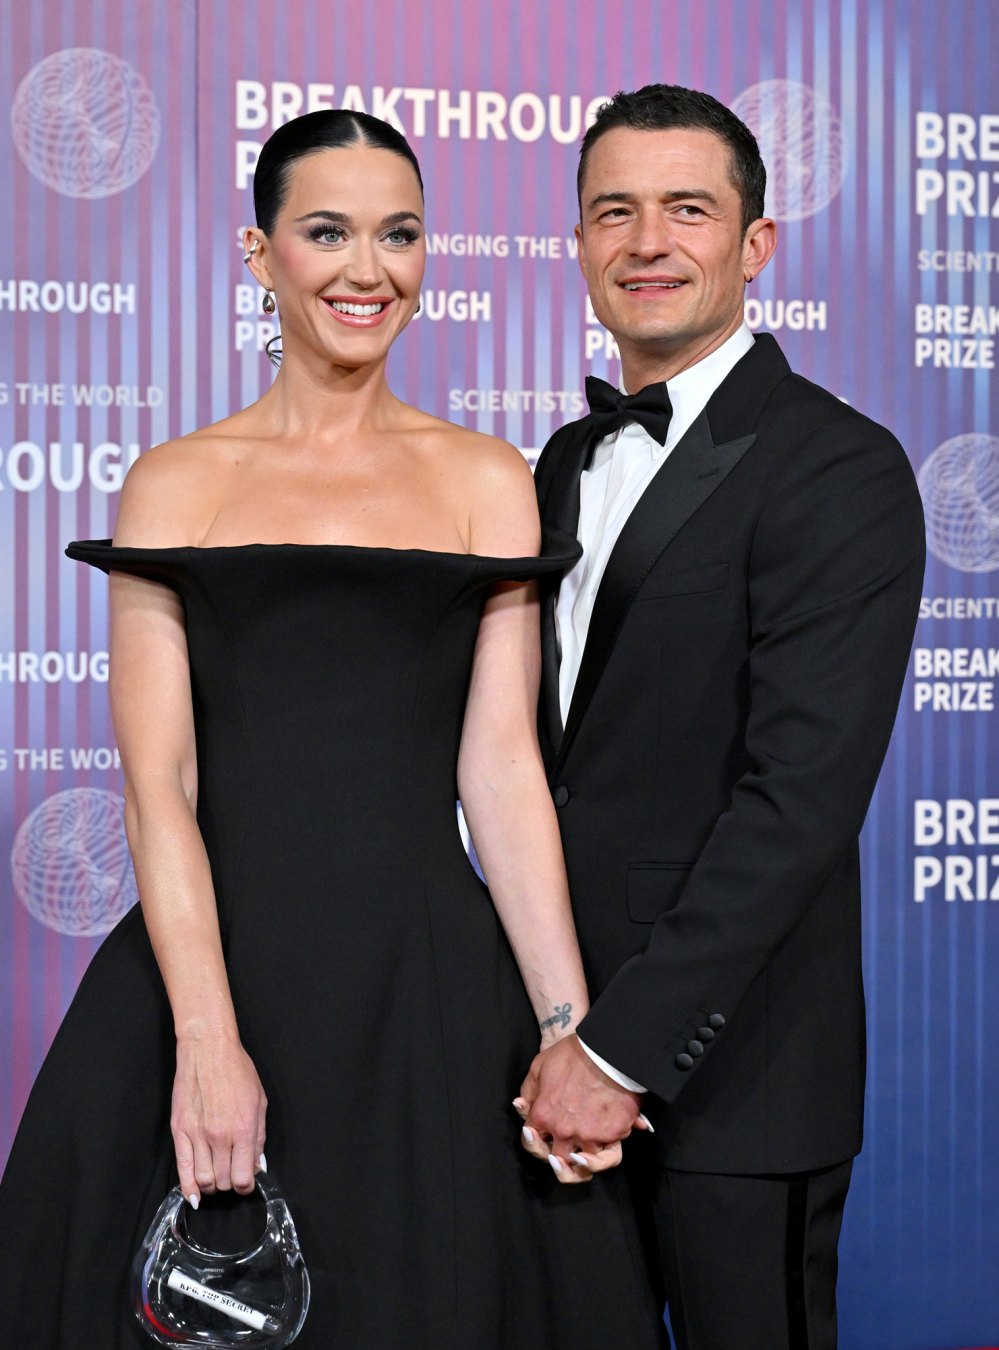 Orlando Bloom Gushes Over Romance With Katy Perry